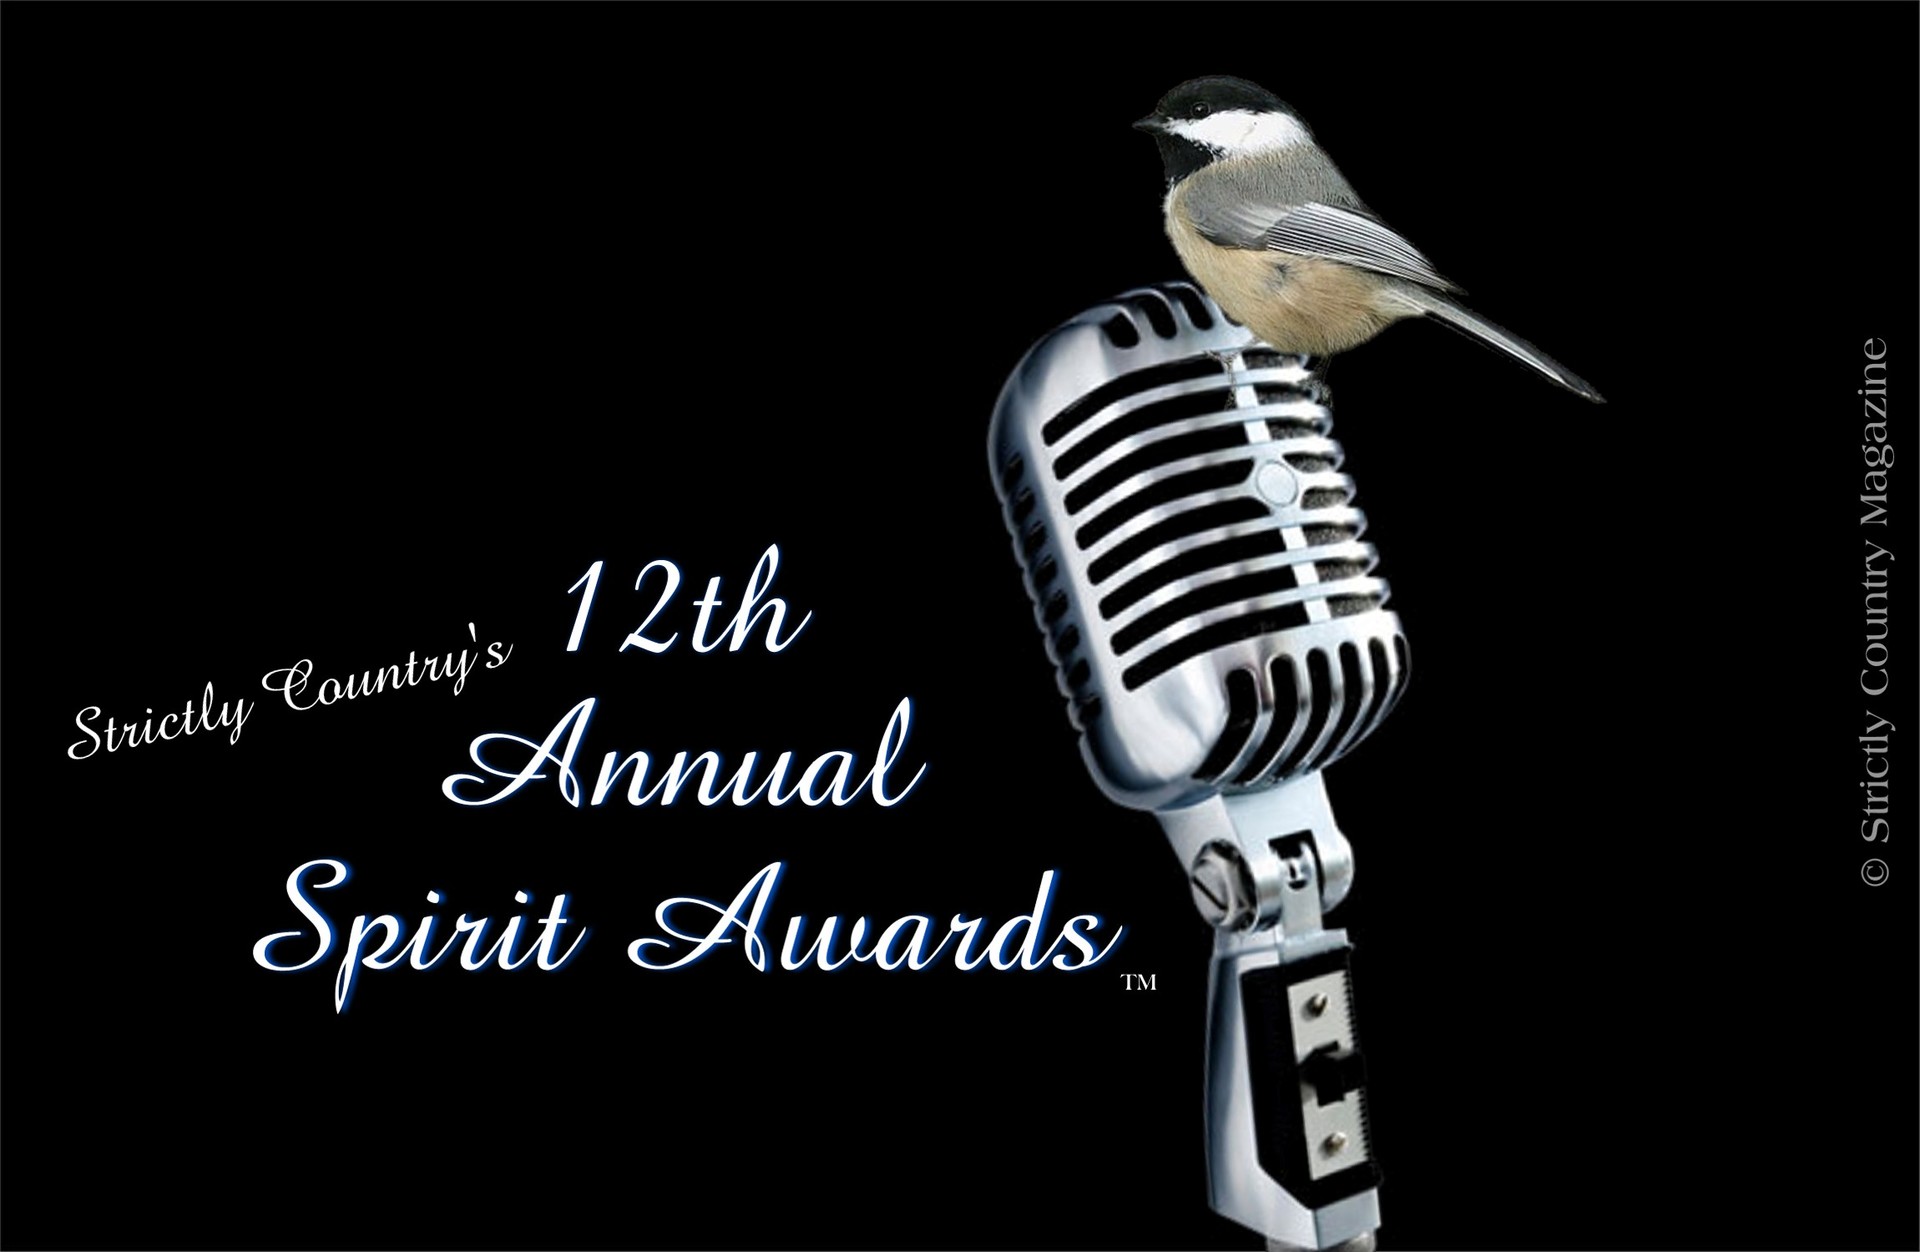 Strictly Country Magazine copyright 12th Annual Spirit Awards official logo